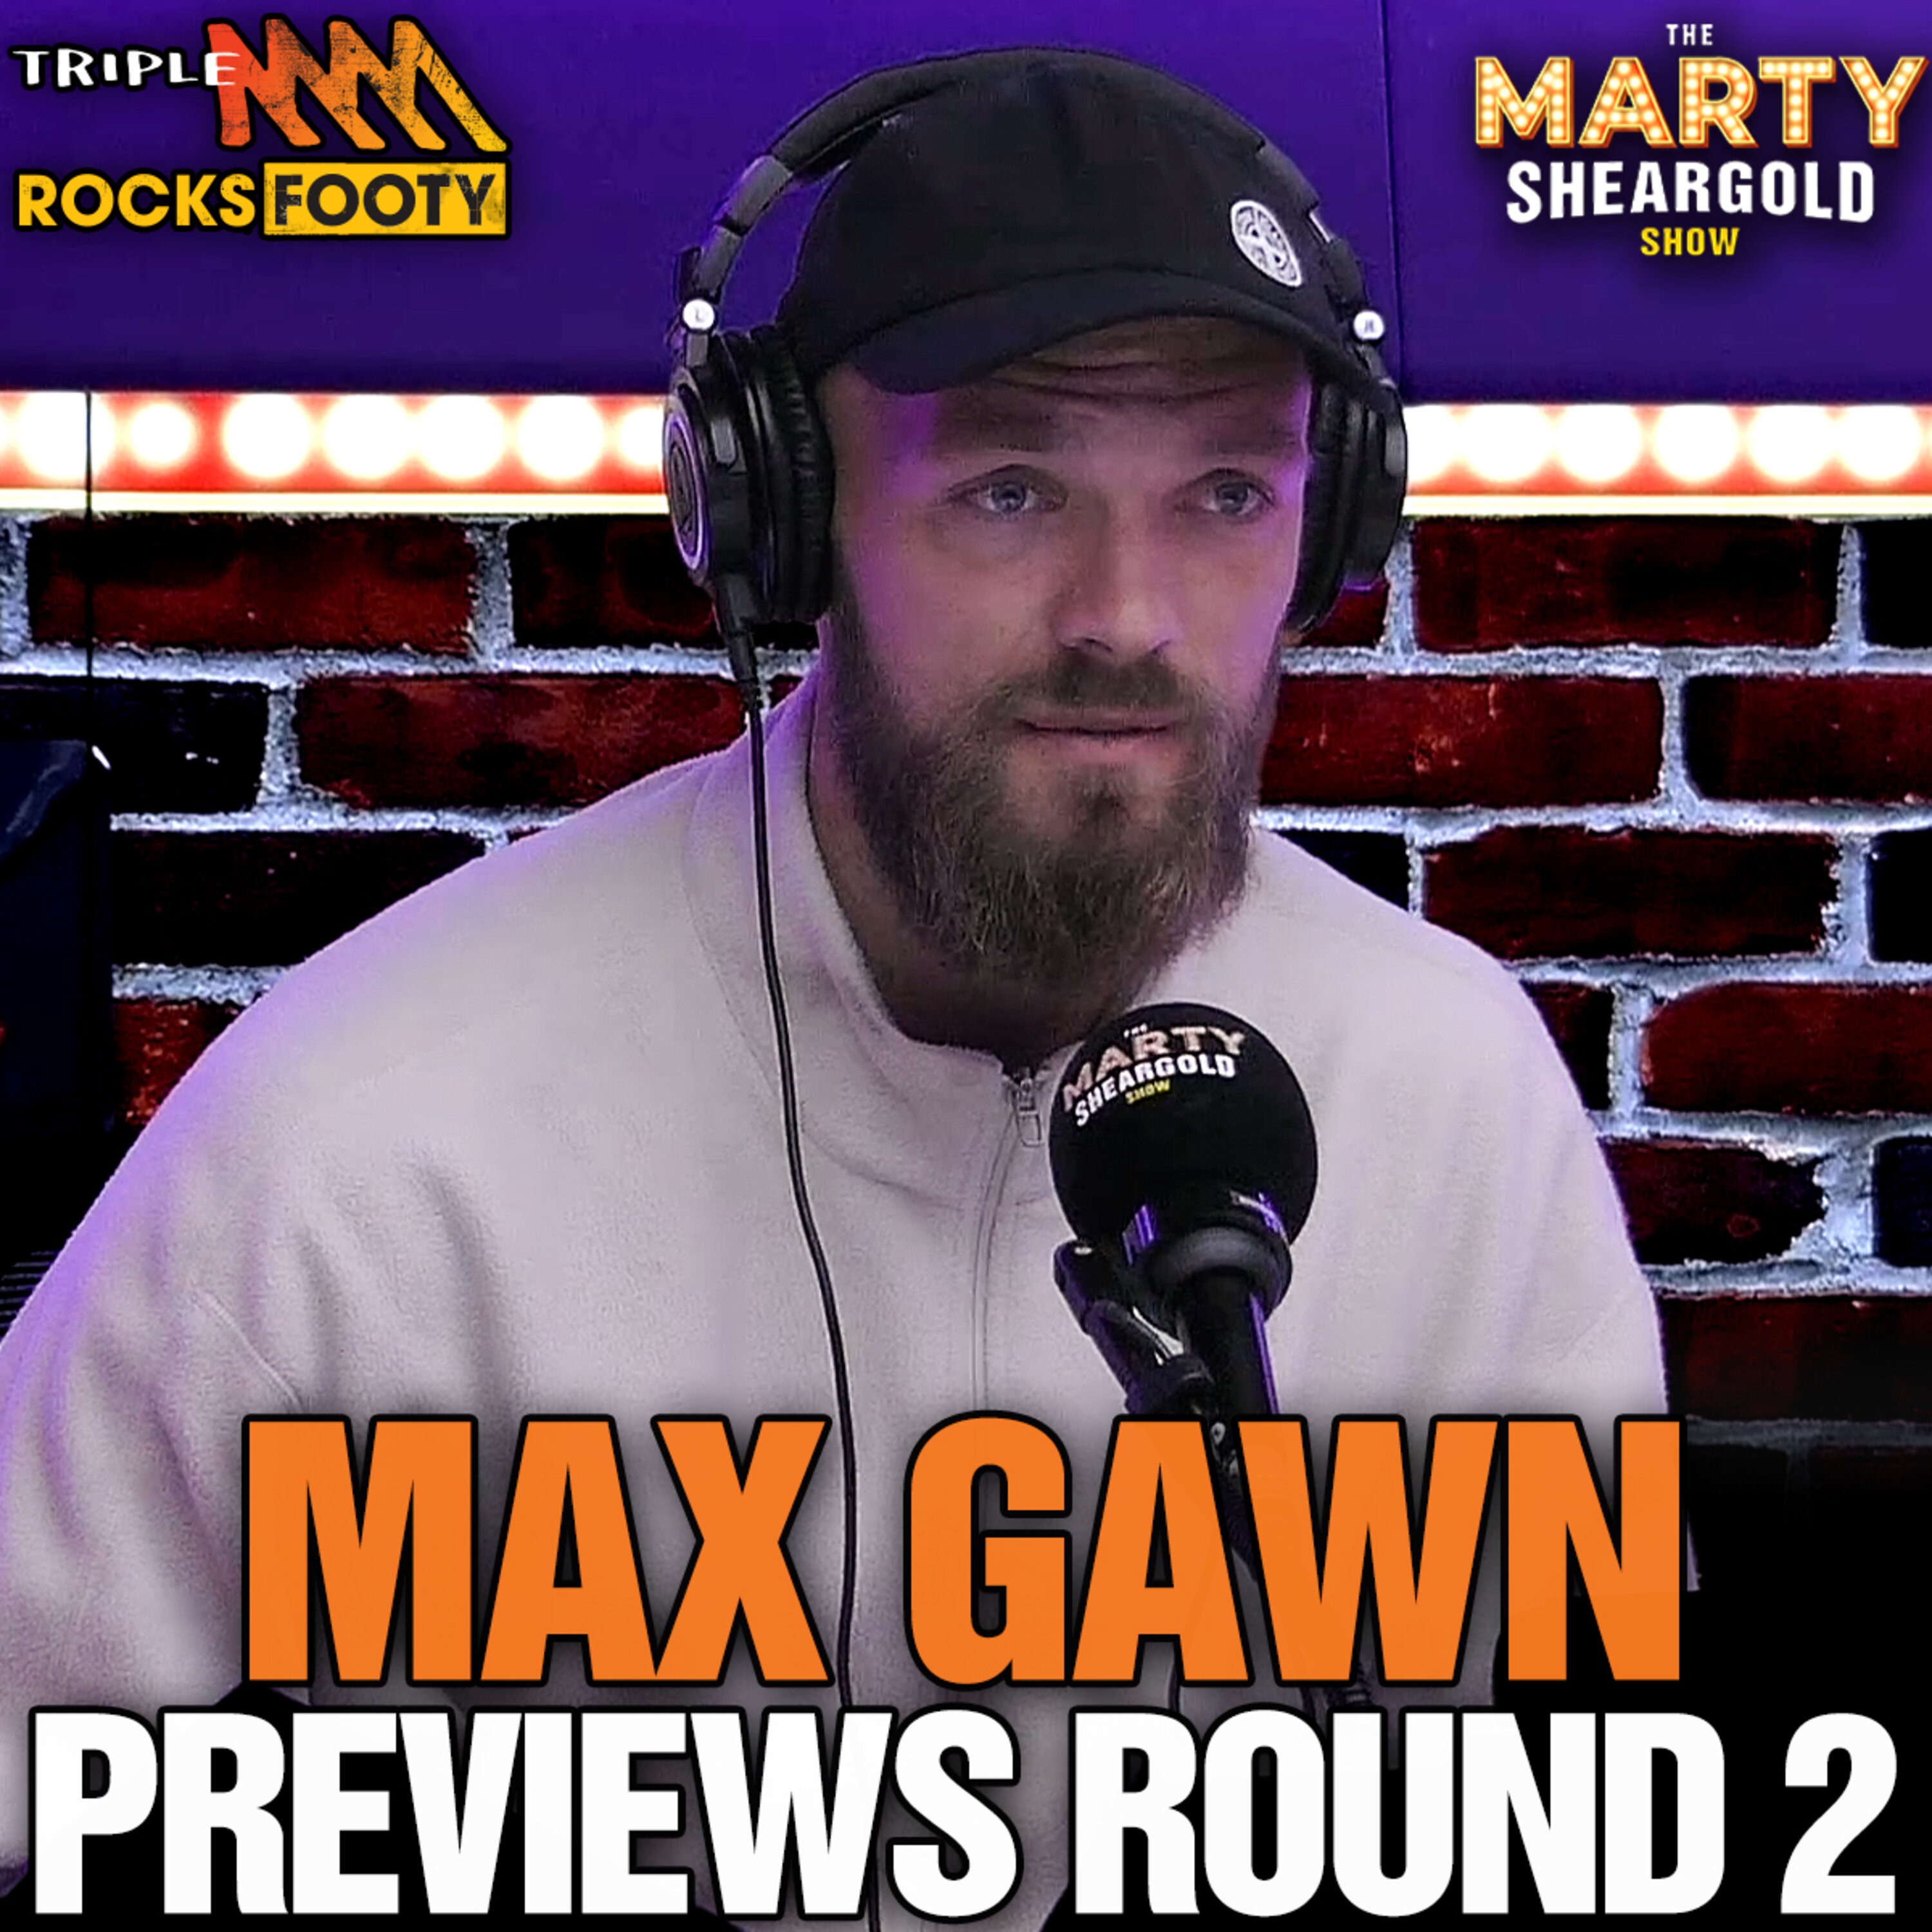 Max Gawn on Kozzie Pickett's bump, Melbourne's three main rivals, and a preview of round 2